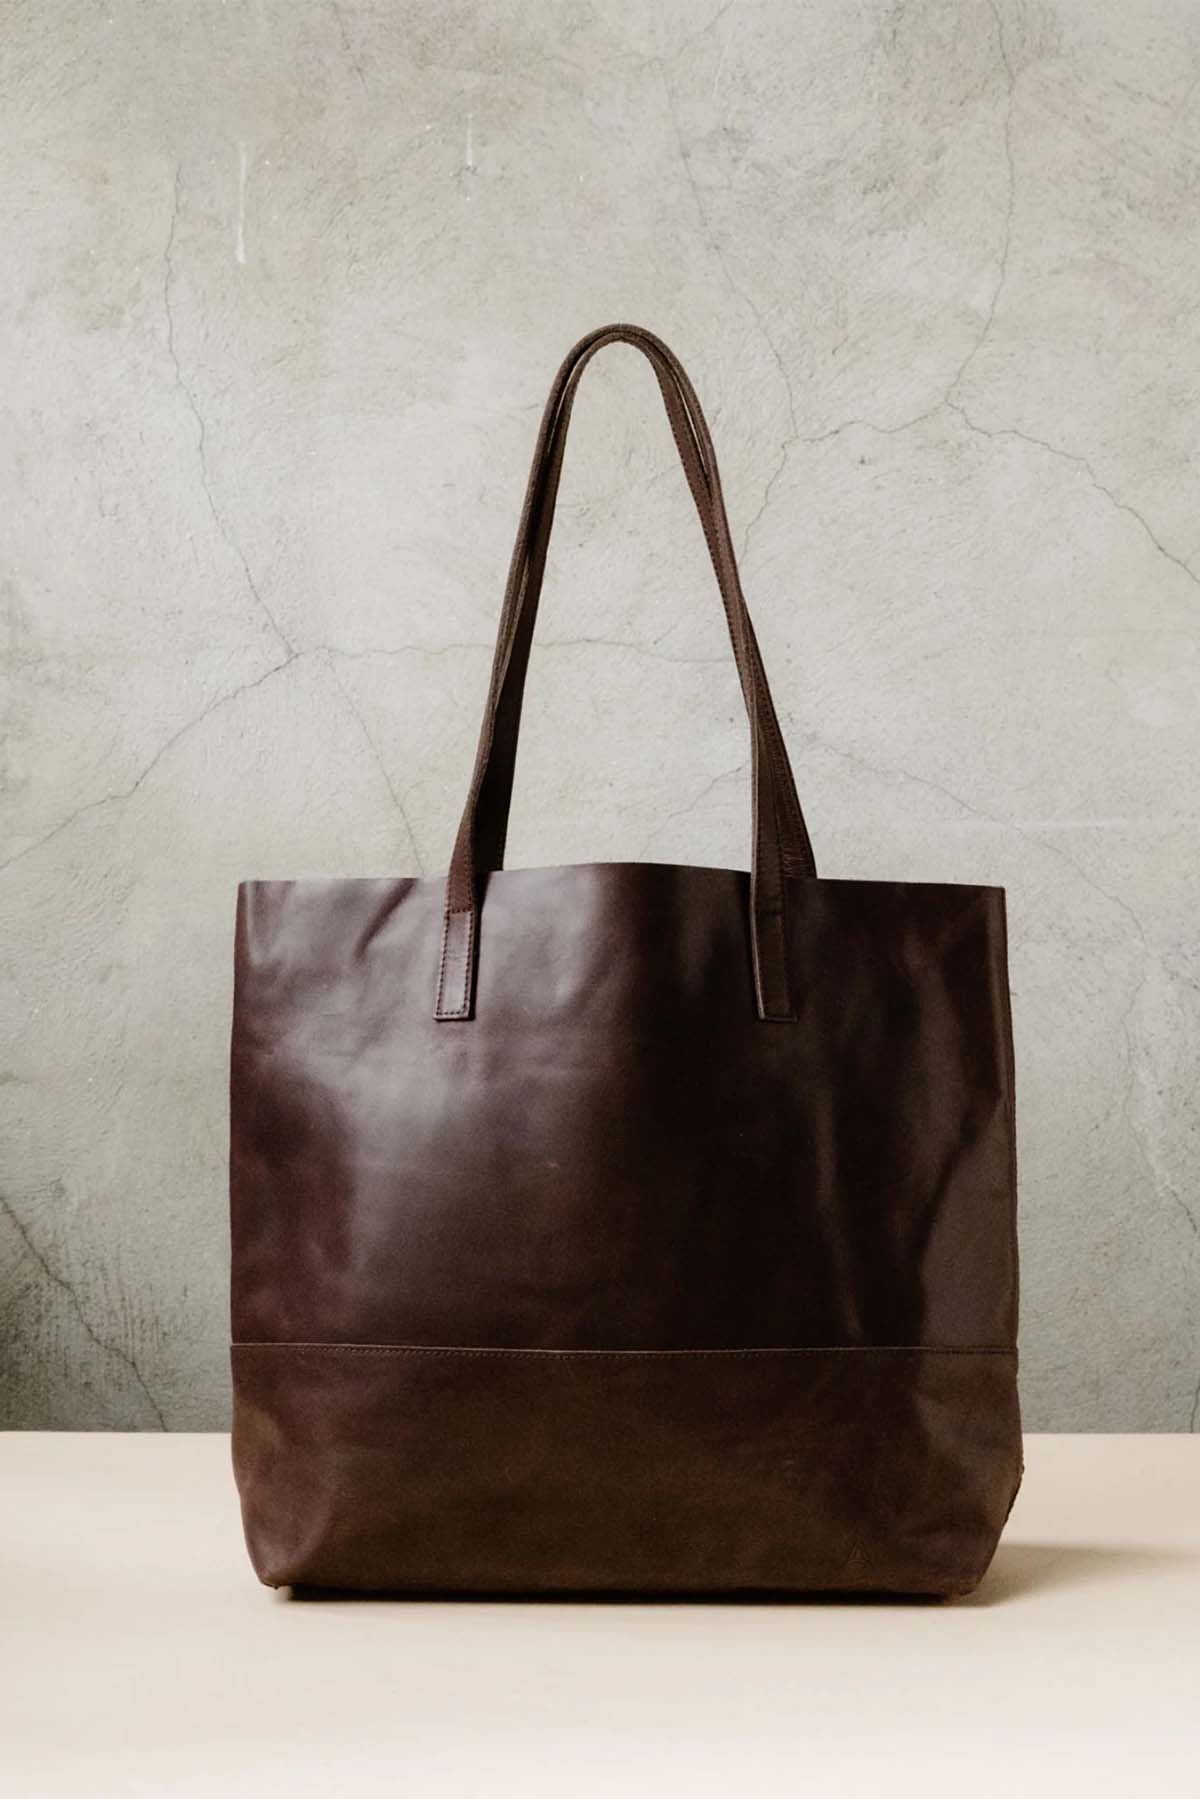 Able - Mamuye Classic Tote - Chocolate Brown - Front